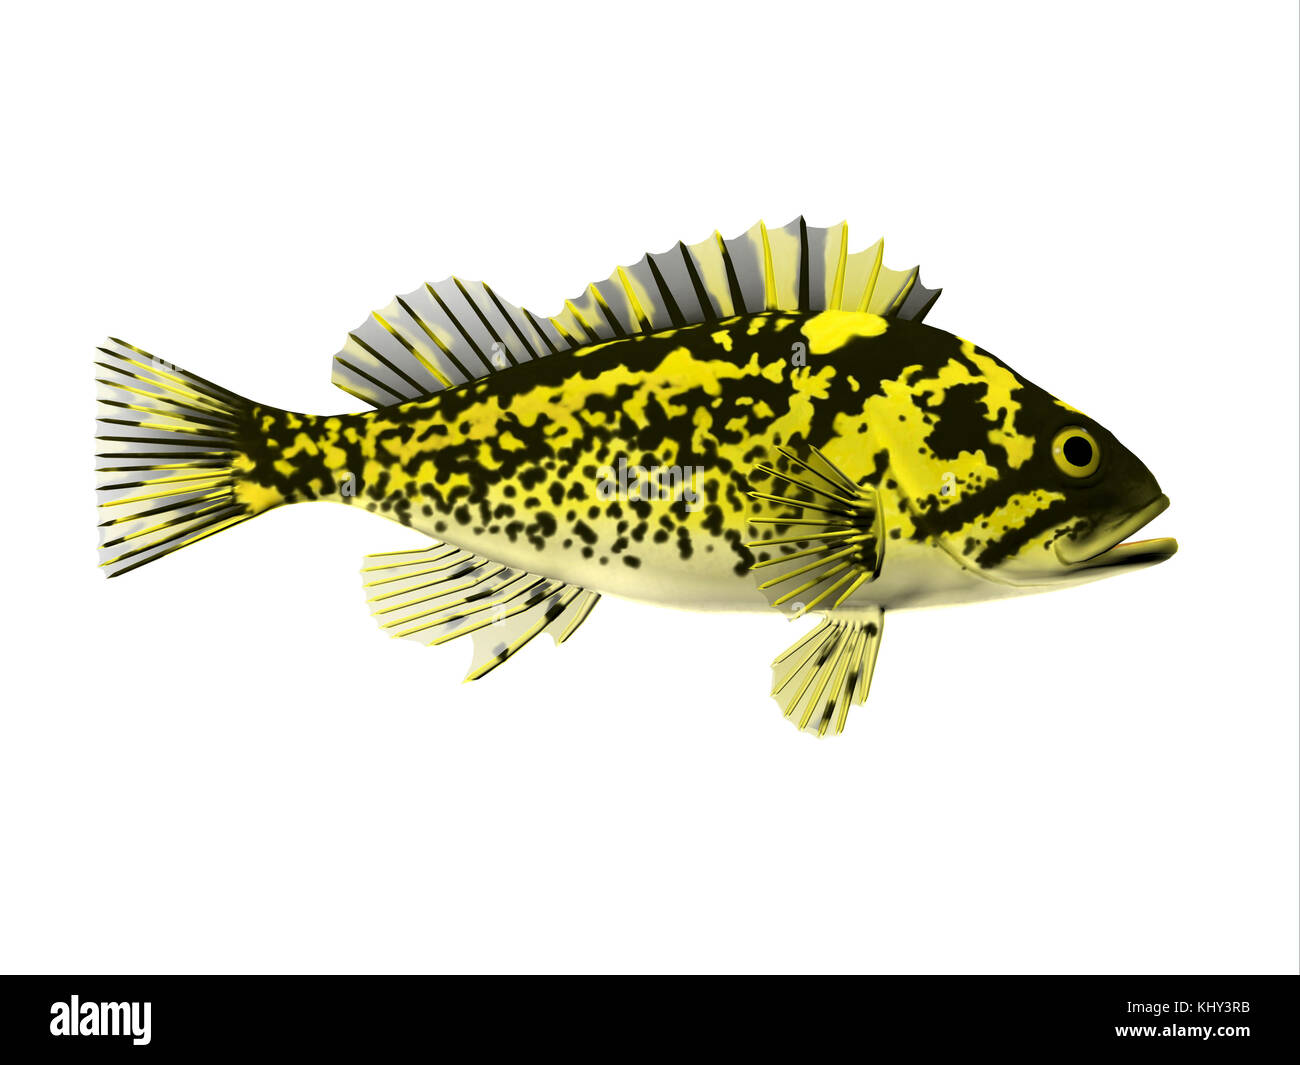 Black and Yellow Rockfish - Rockfish spend most of the time among rocky crevices and boulders in the Pacific ocean and eat crustaceans. Stock Photo